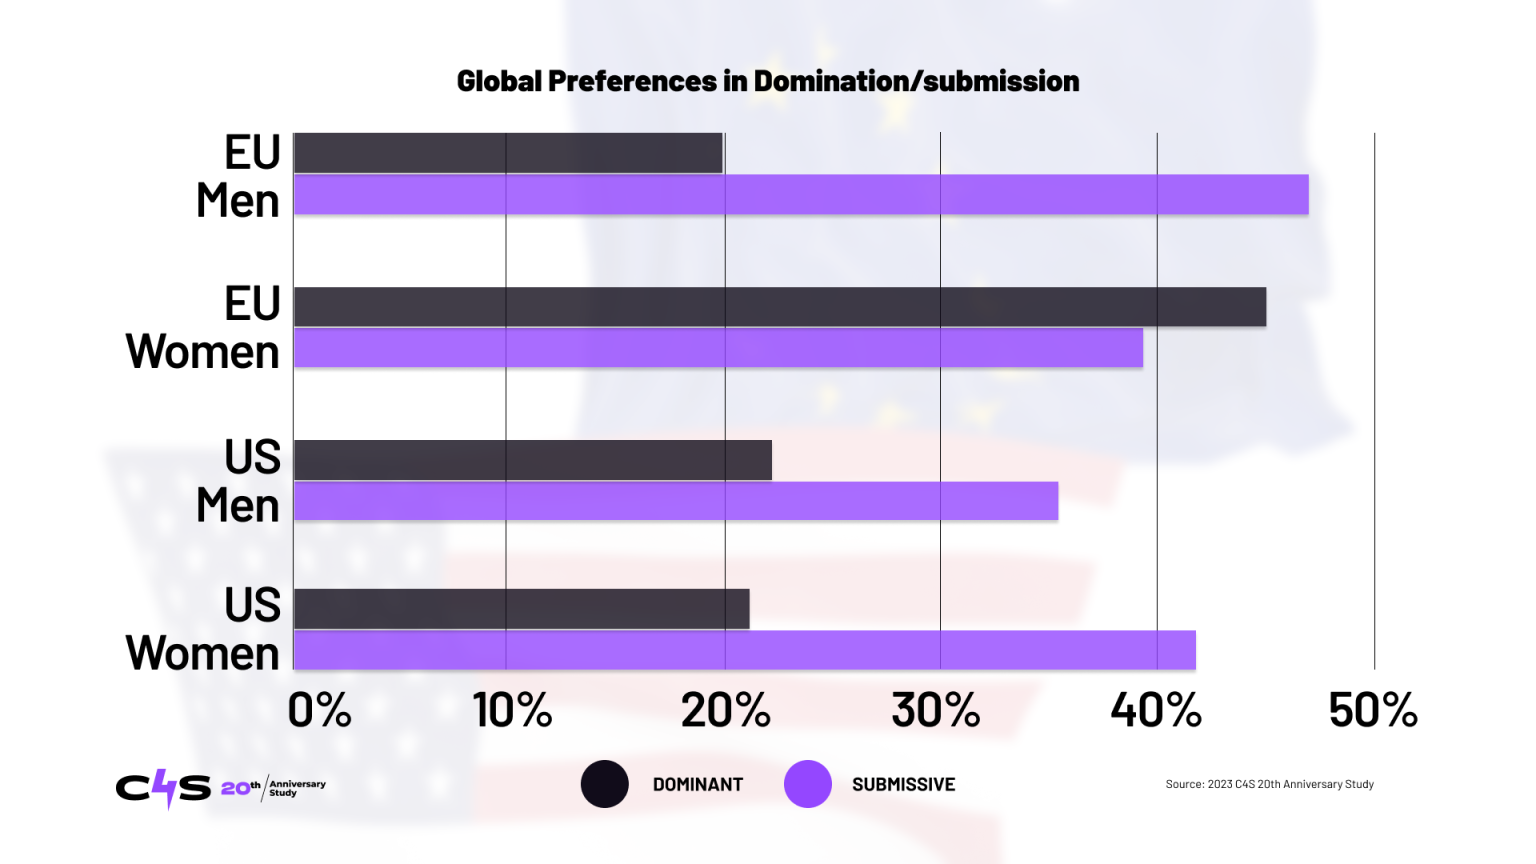 Preference for dominance vs submission in the U.S. and EU